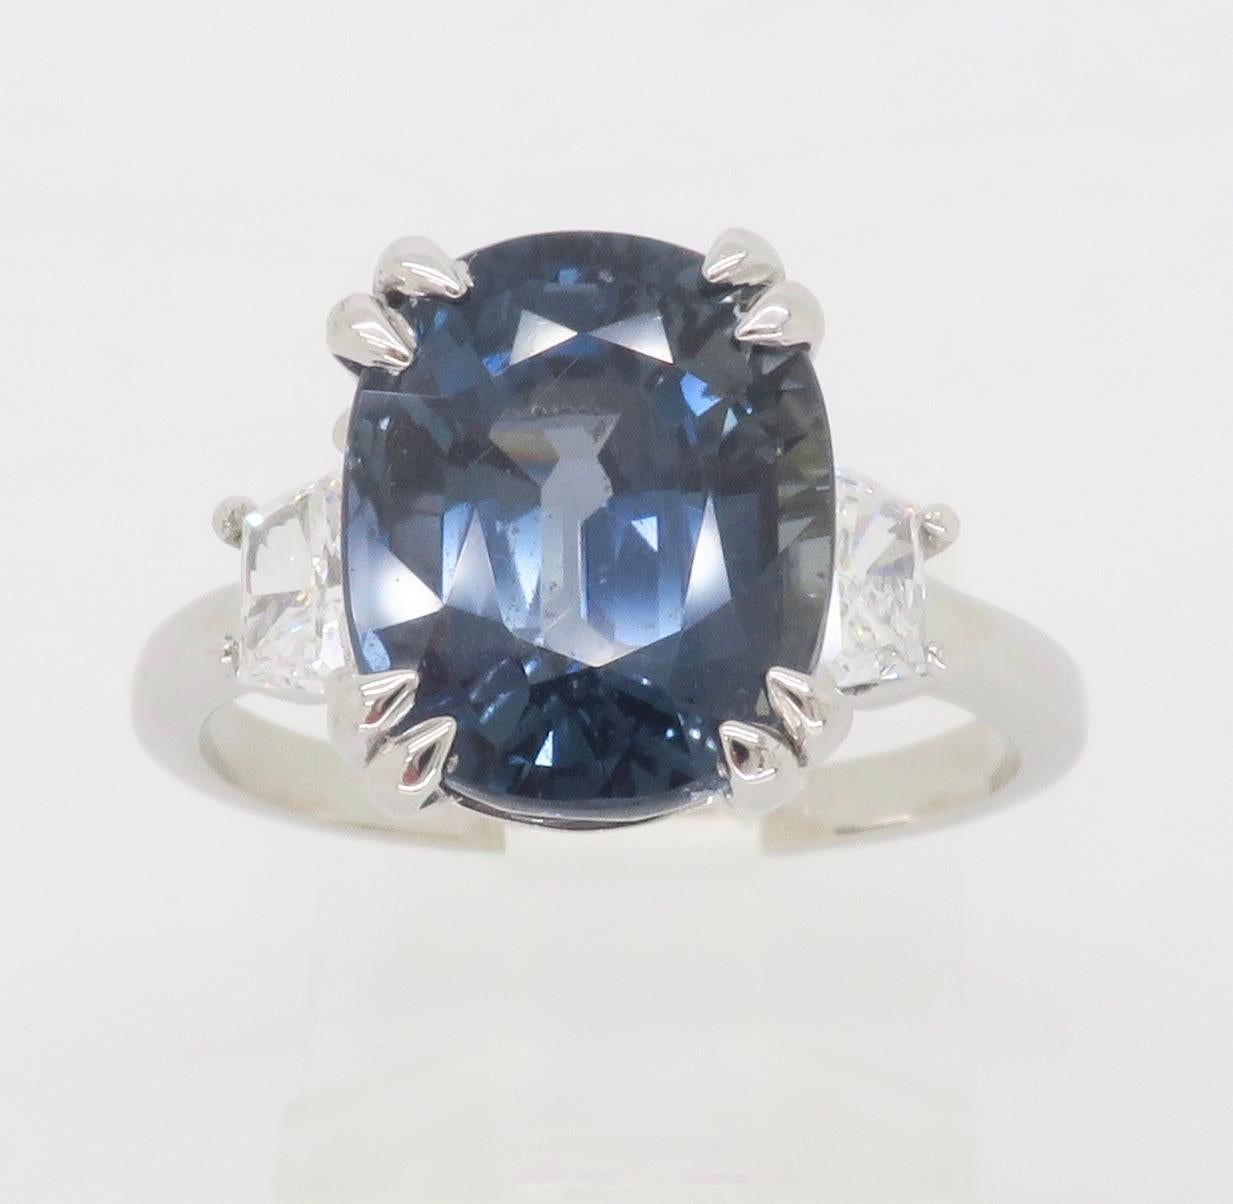 GIA Unheated Color Change Tanzanian Sapphire and Diamond Cocktail Ring In Excellent Condition For Sale In Webster, NY